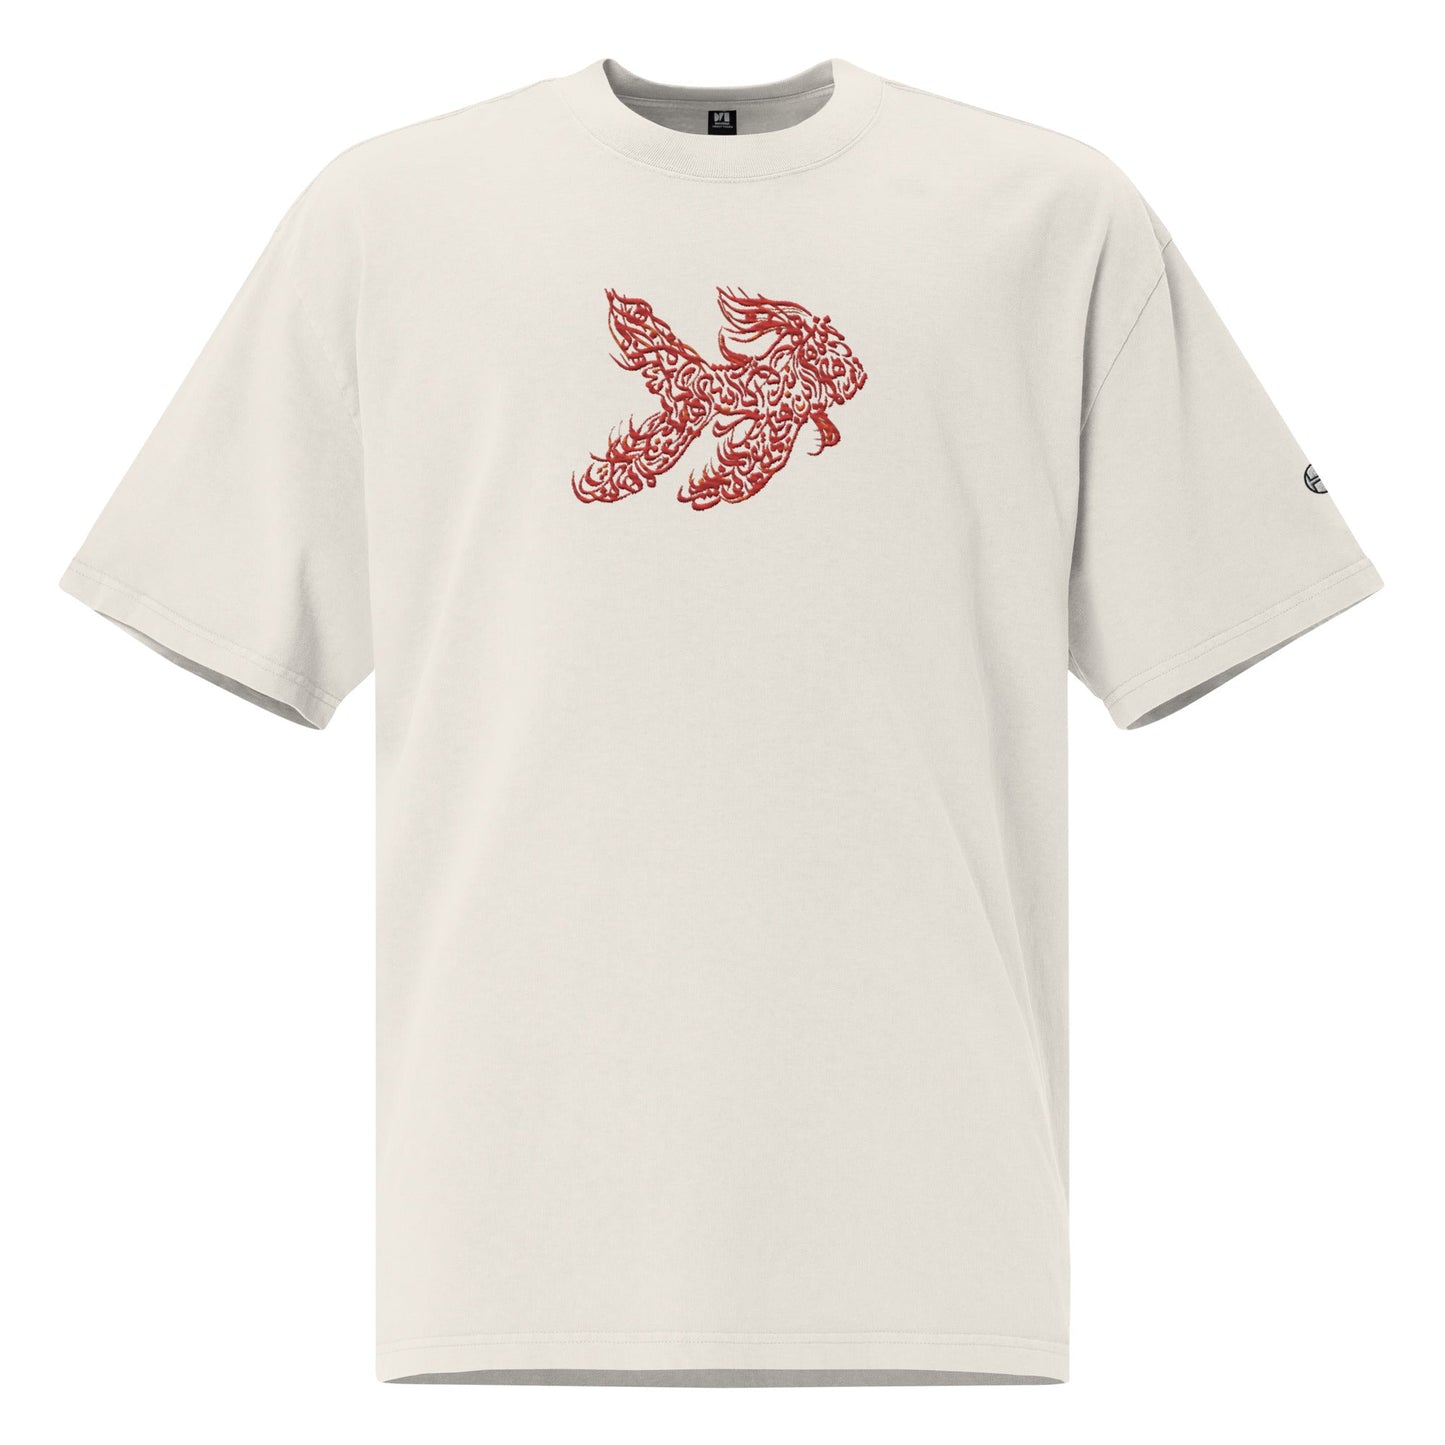 Oversized Faded T-Shirt for Women - FISH - Bonotee